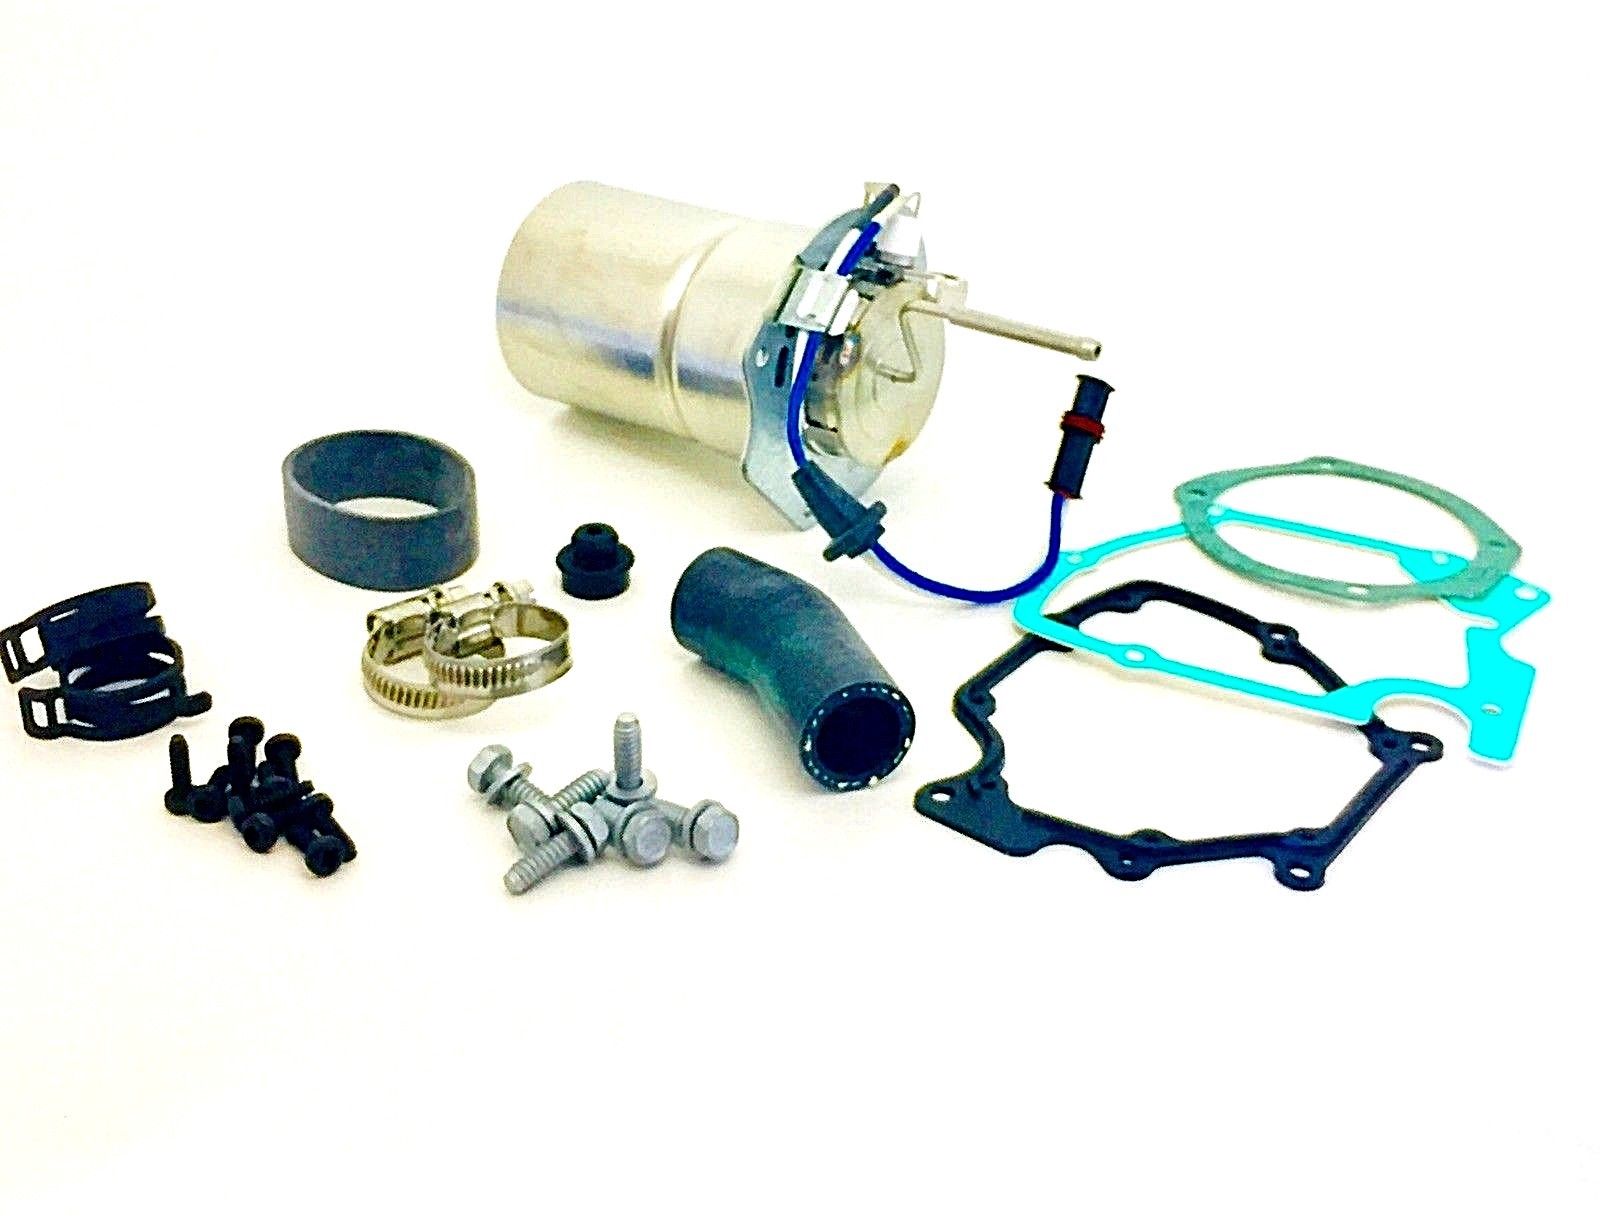 Webasto Burner Replacement Kit For Tsl17 Thermotop C 1322639A Heater Part